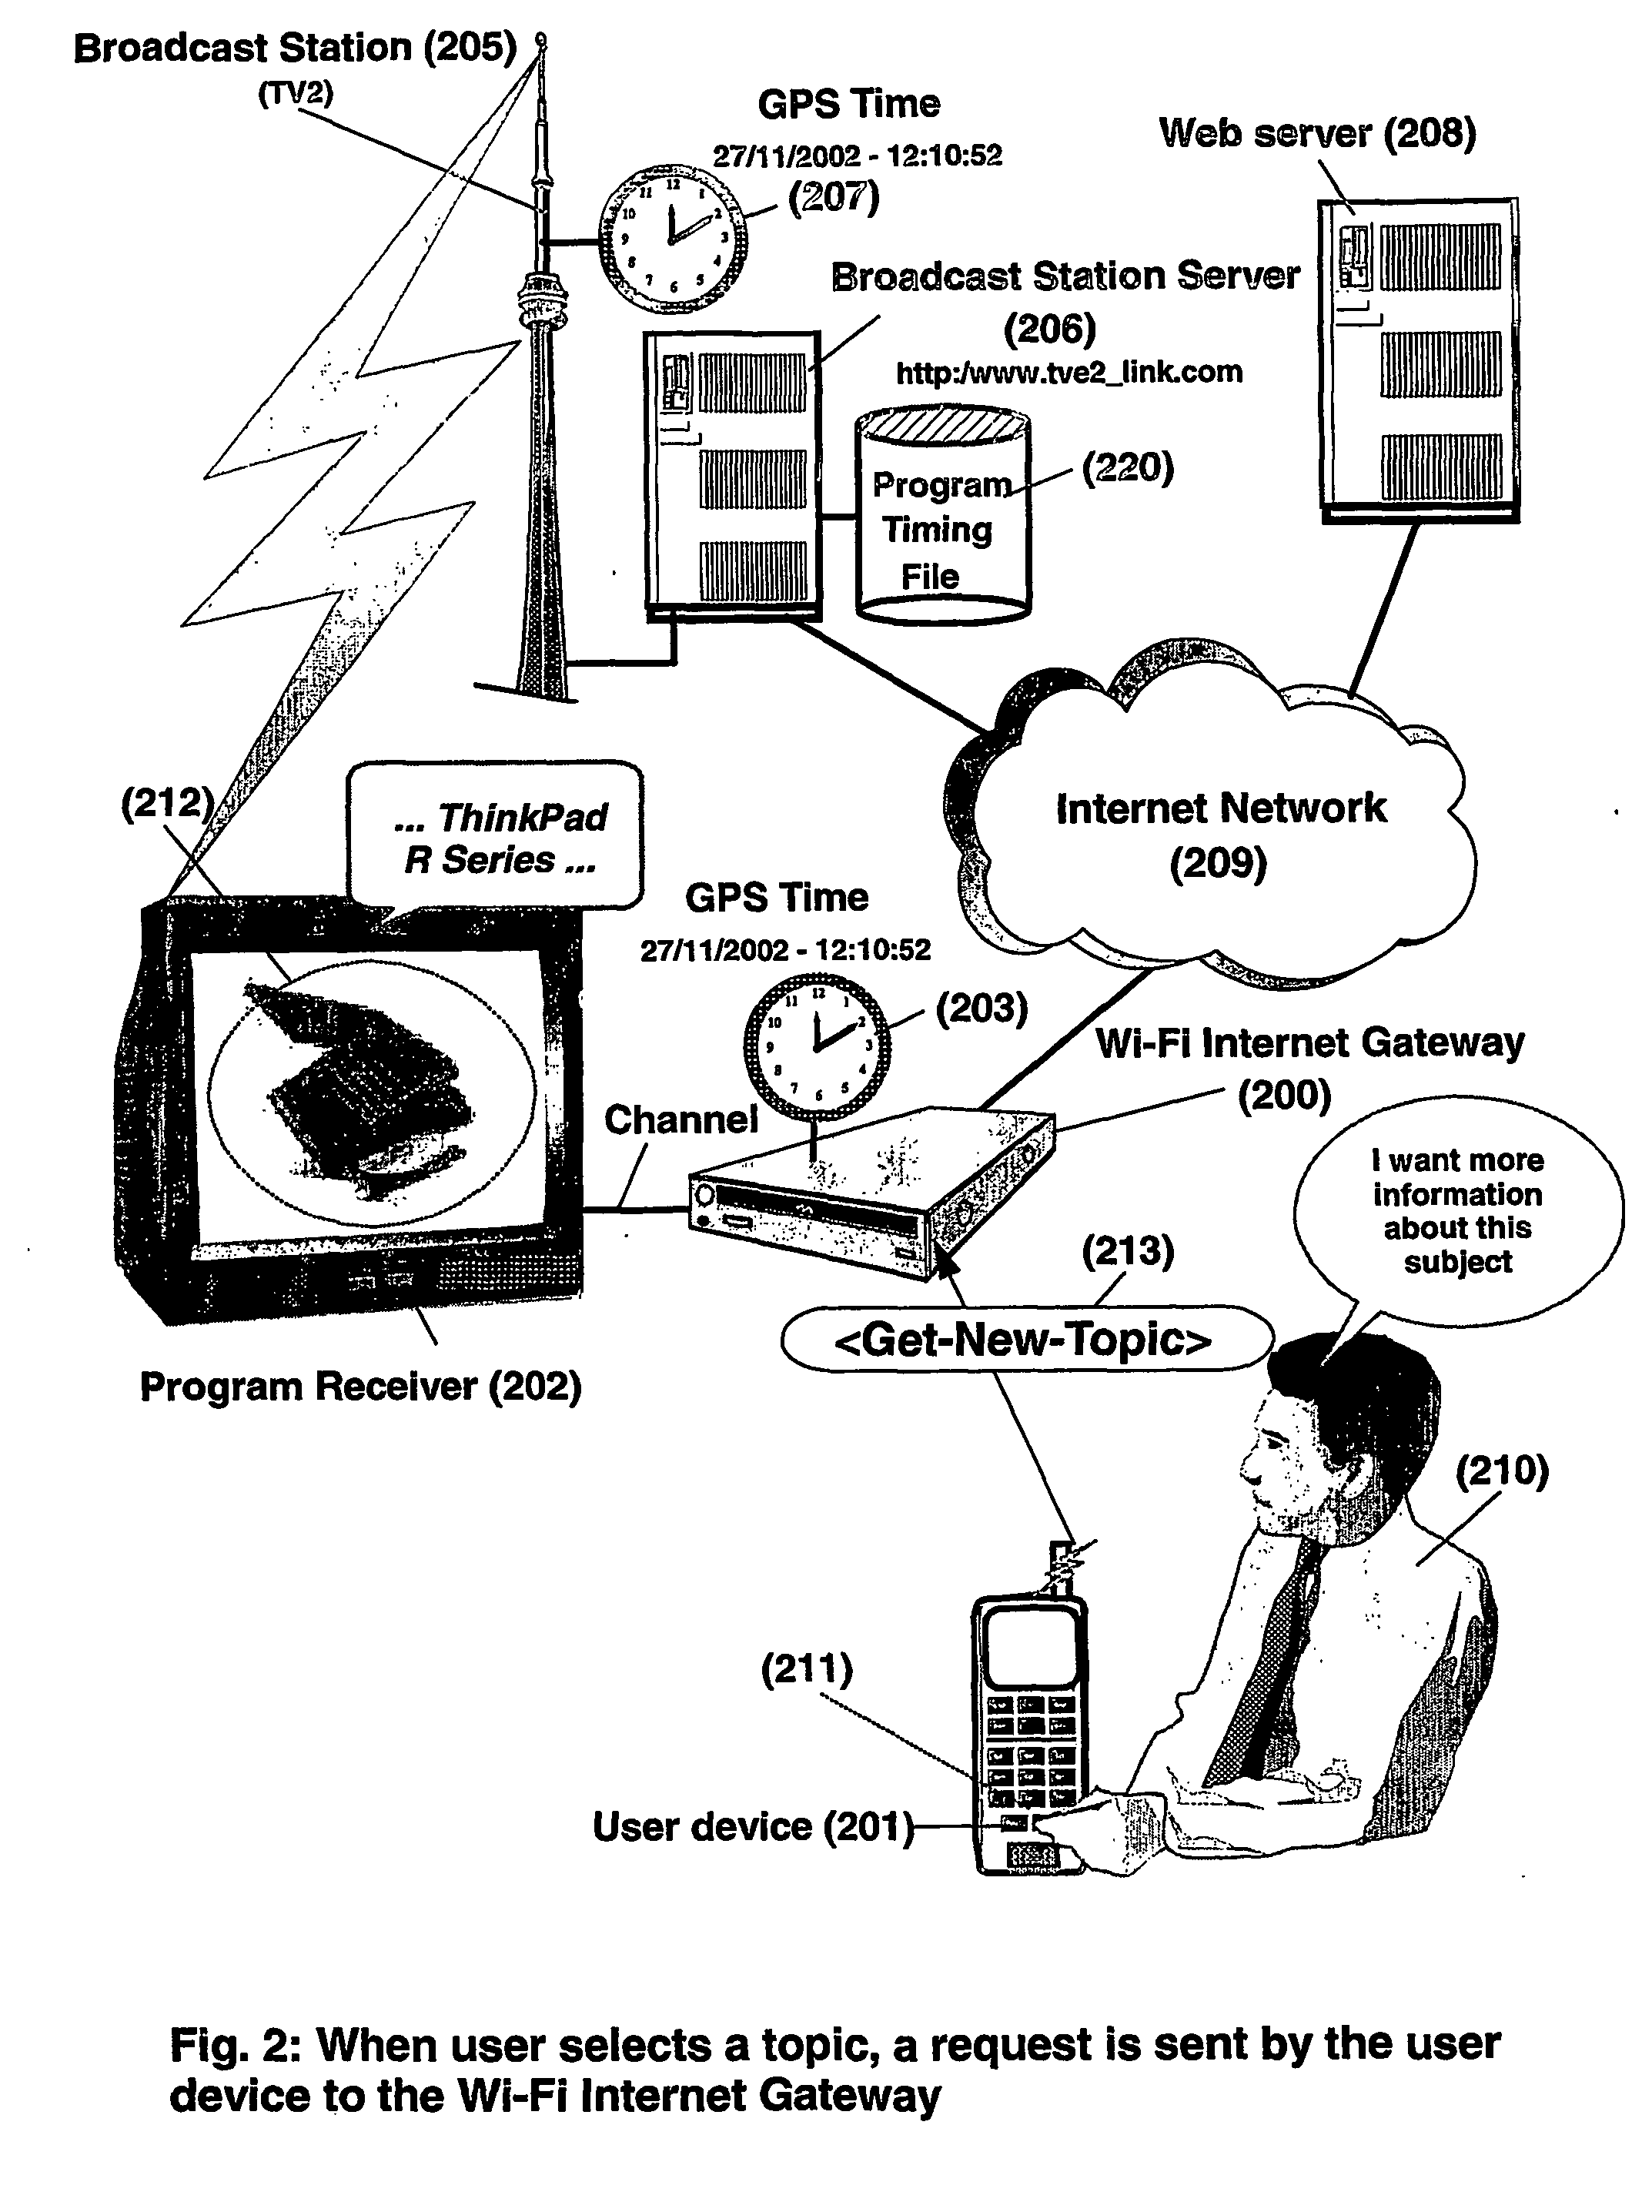 System and method for accessing through wireless internet access points information or services related to broadcast programs